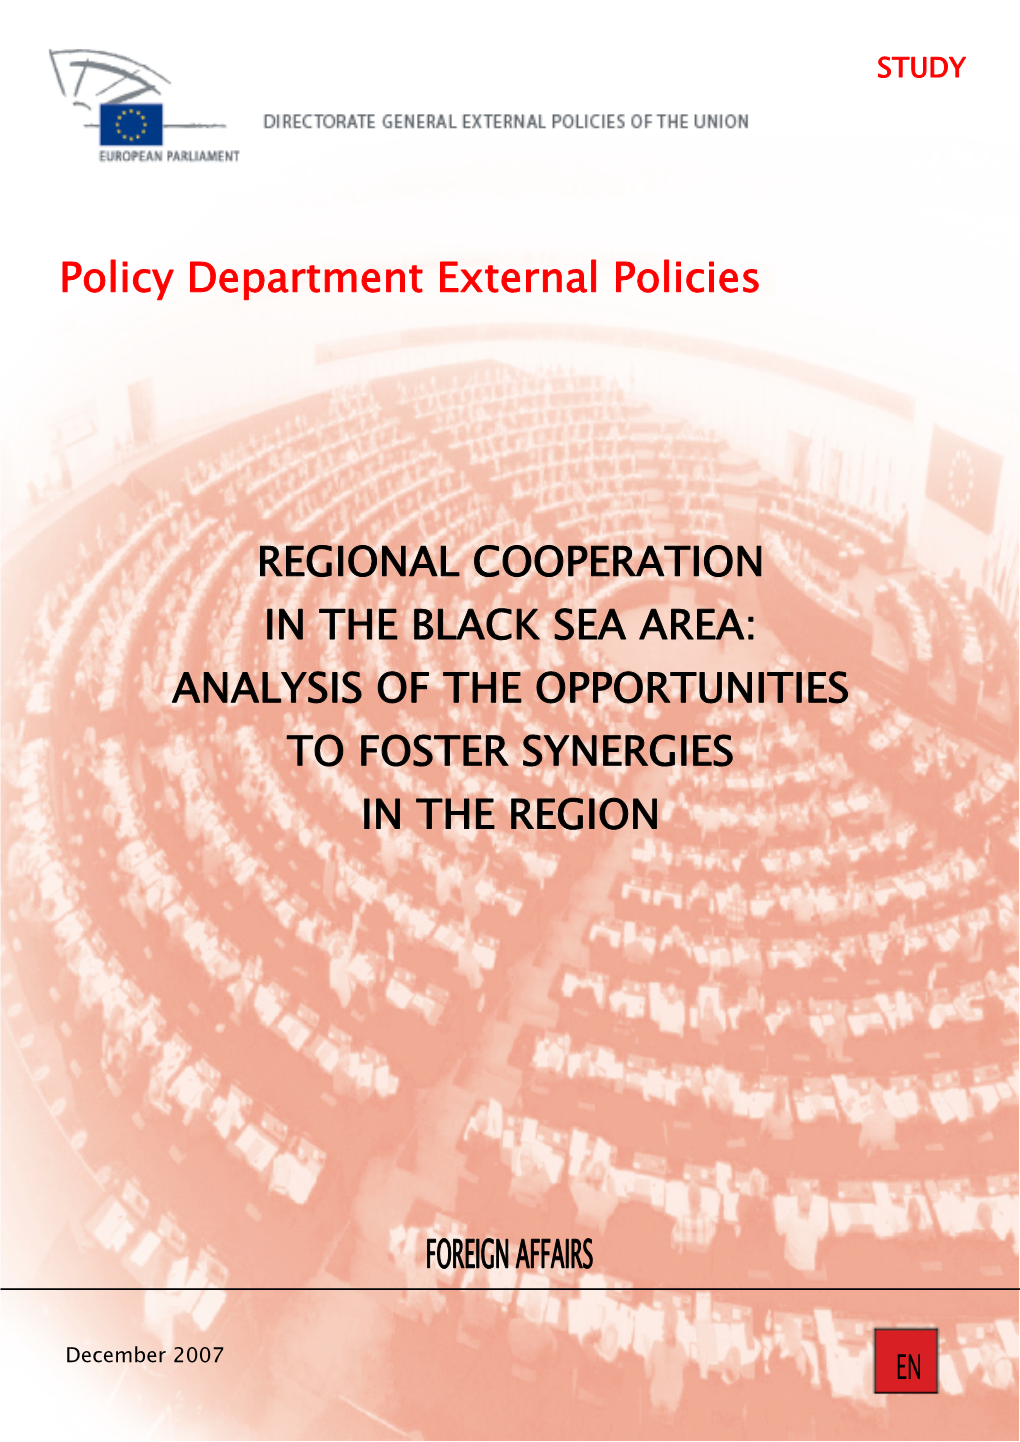 Policy Department External Policies REGIONAL COOPERATION in THE